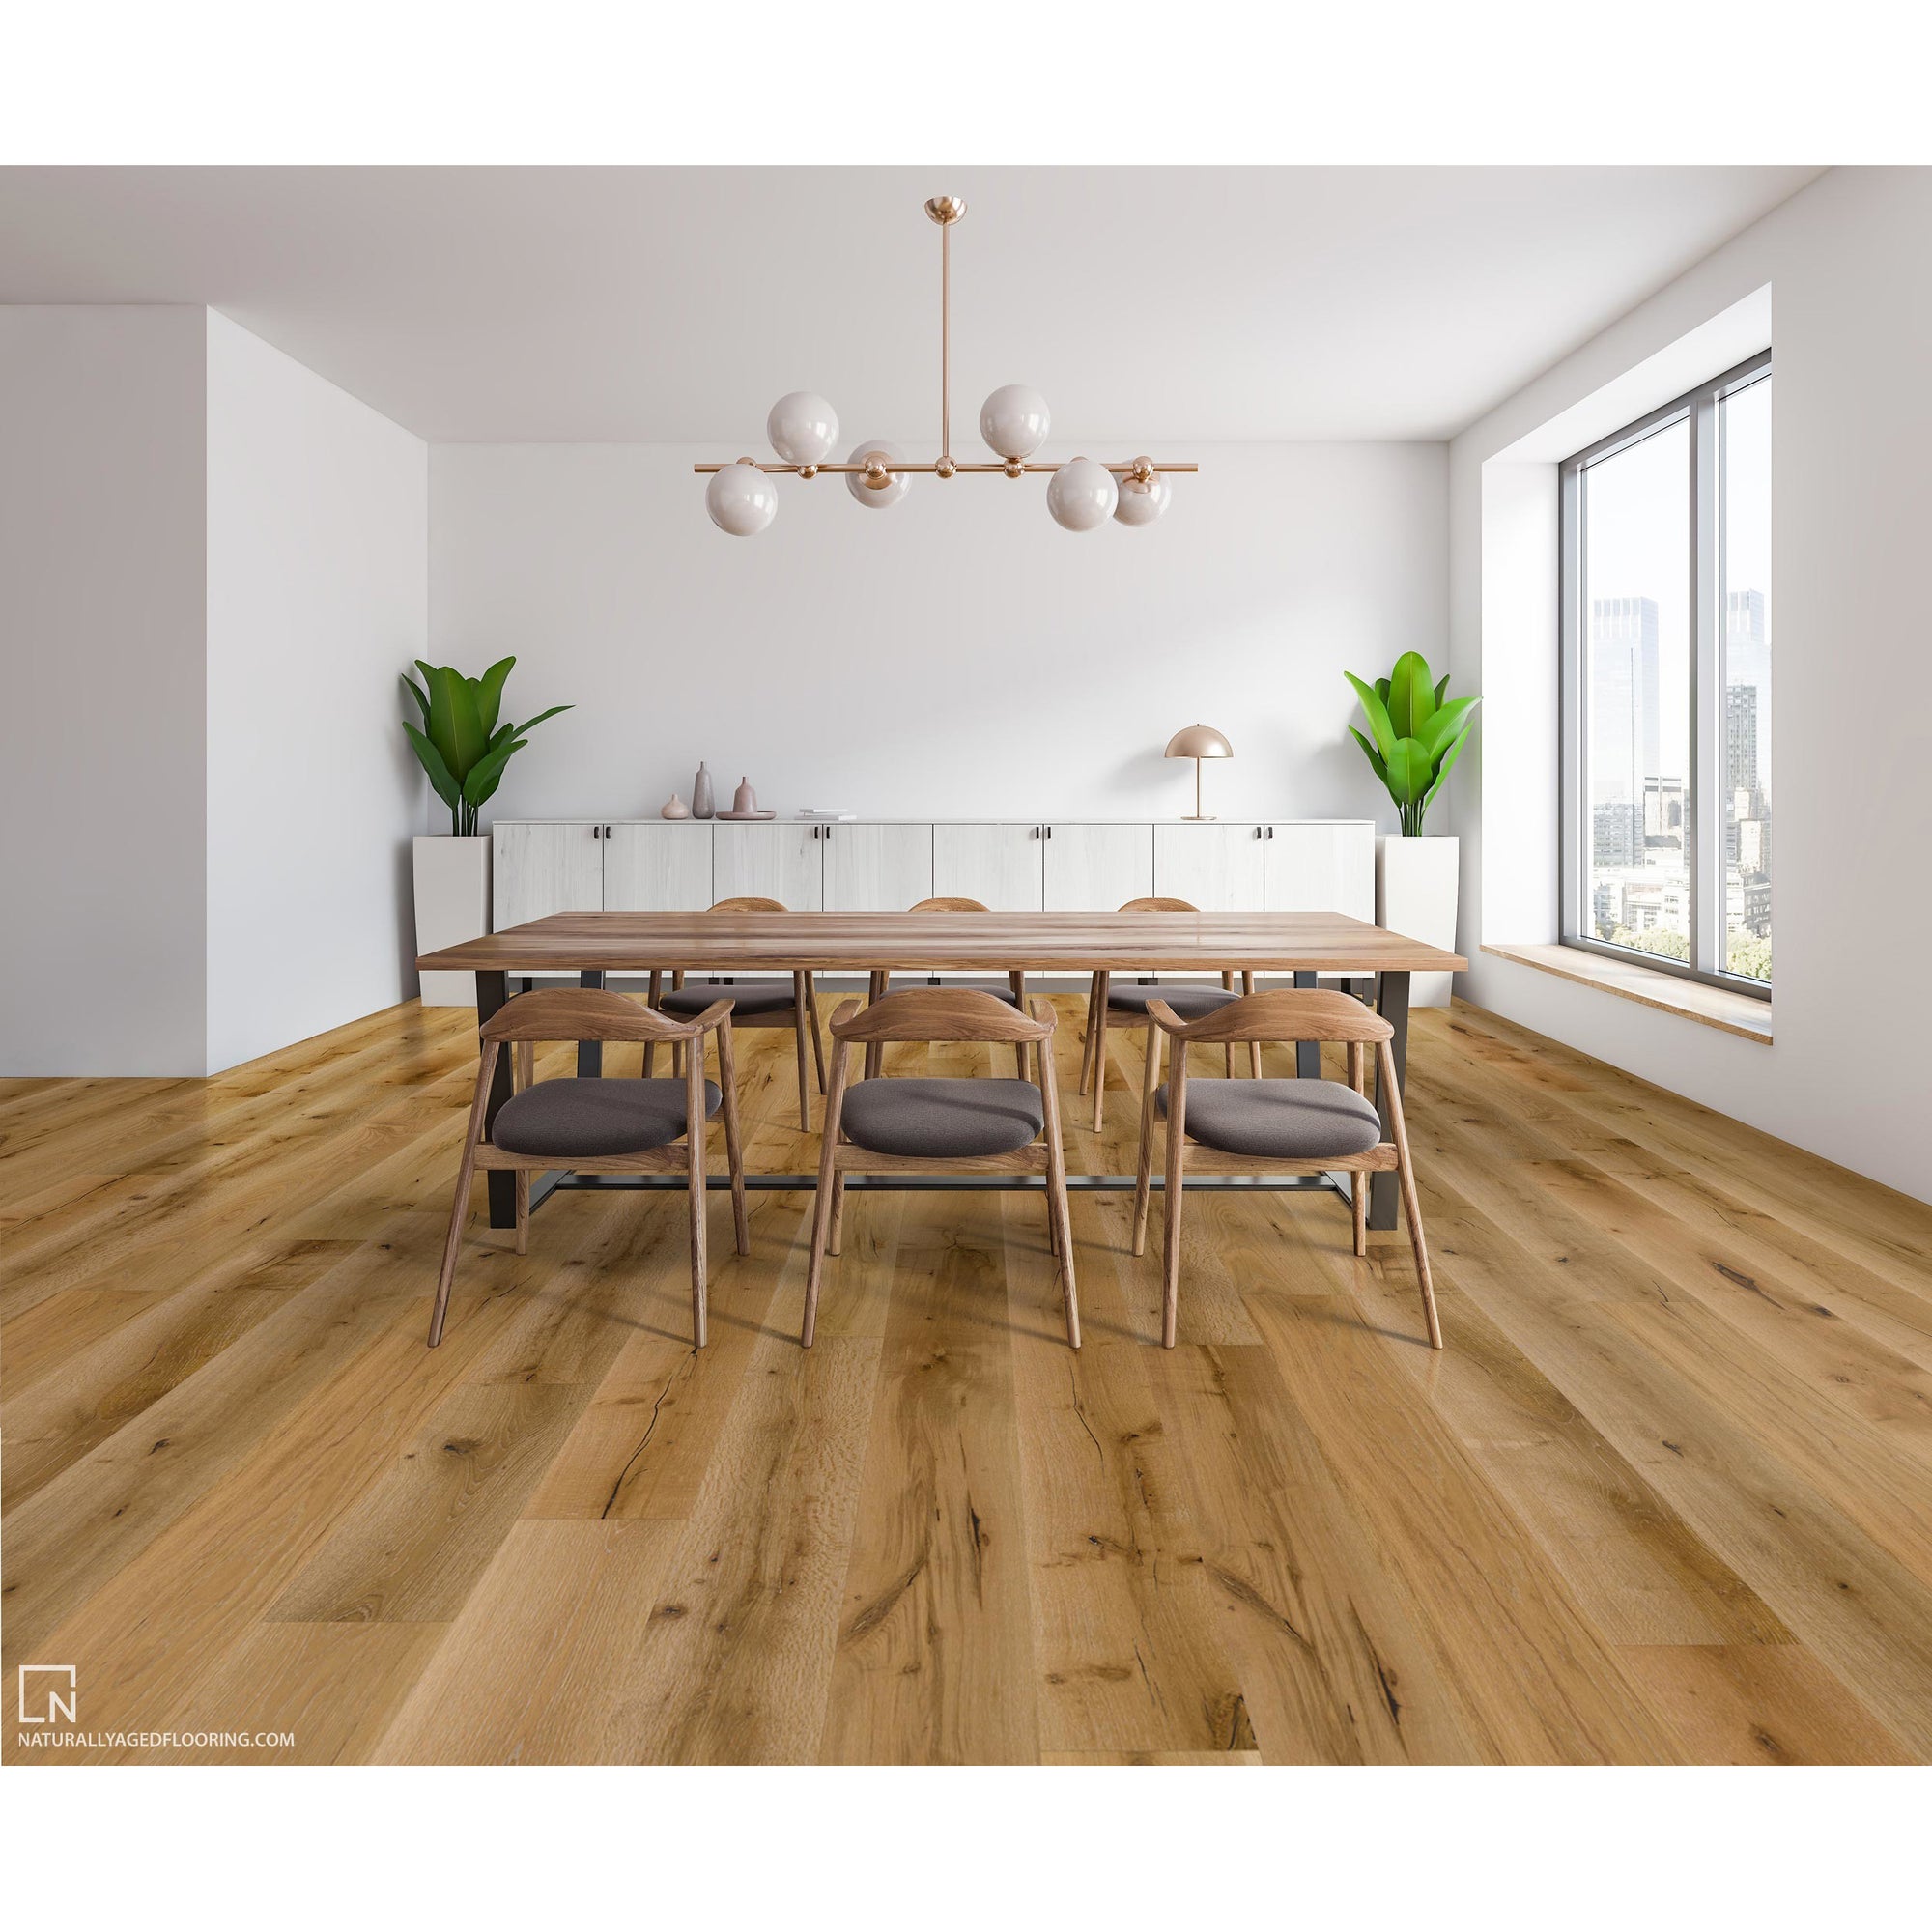 Naturally Aged Flooring - Pinnacle Collection - Aphelion